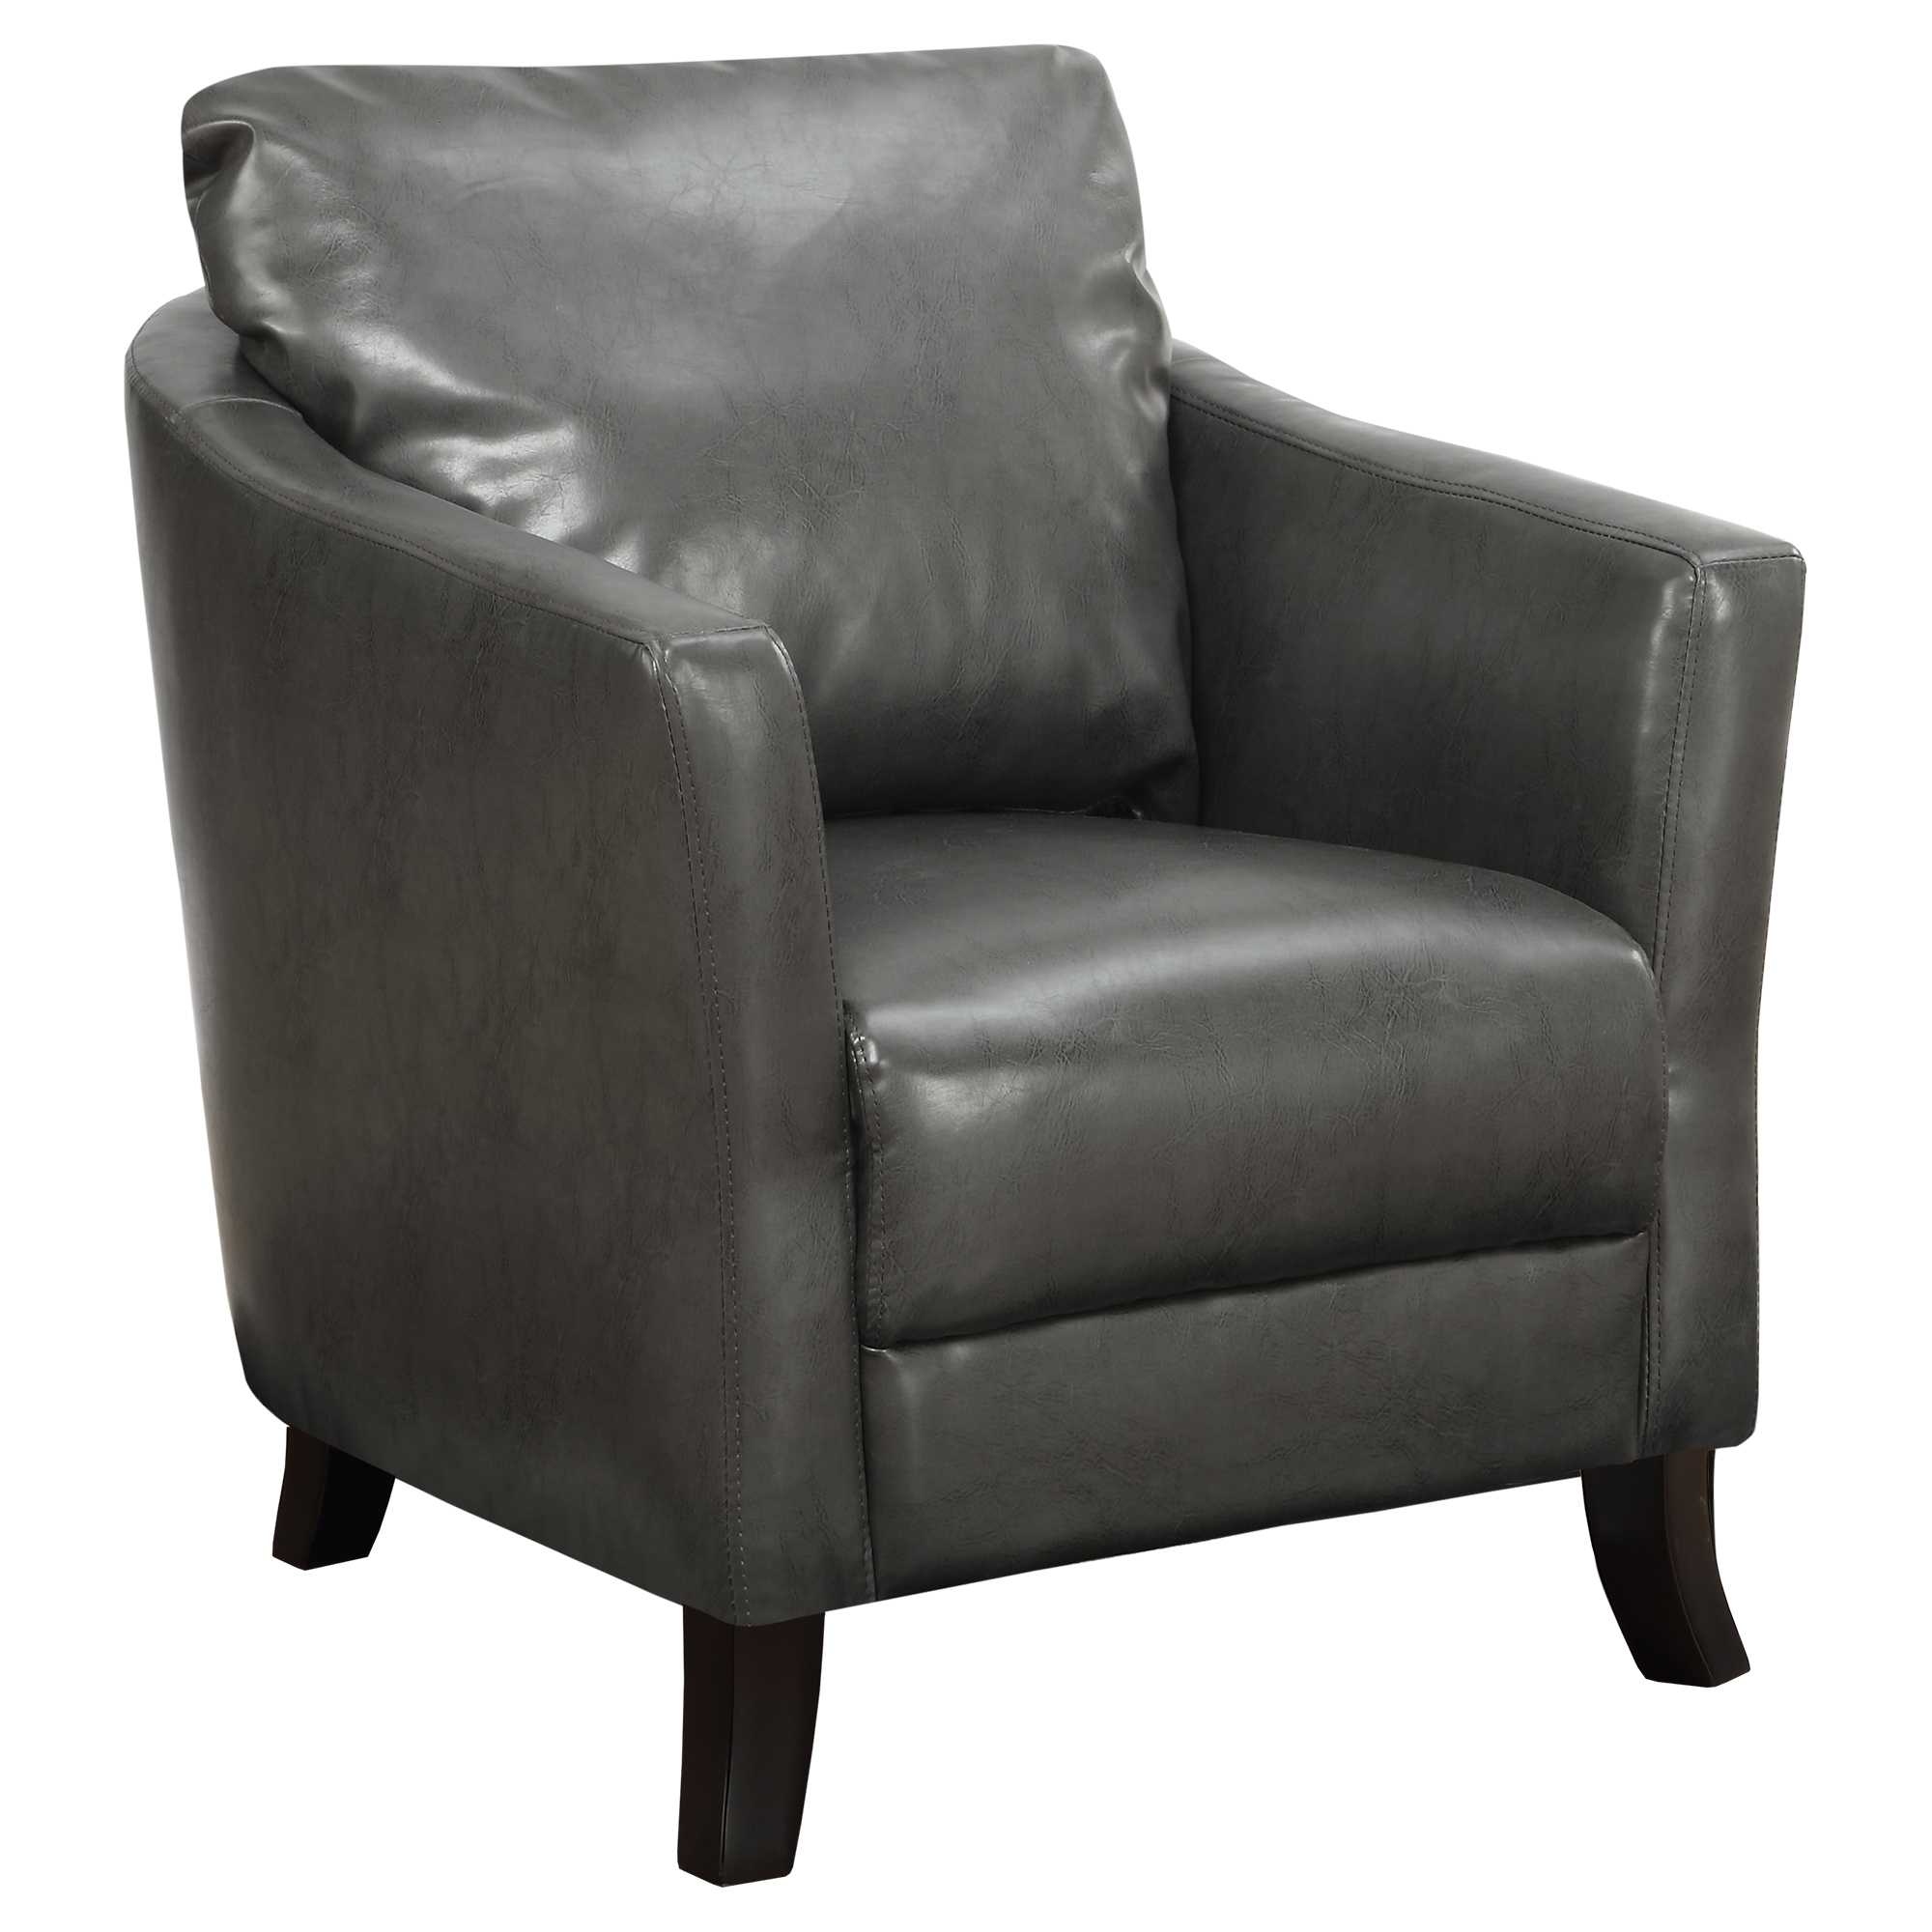 33" x 29.75" x 35" Charcoal Grey Leather-Look Accent Chair